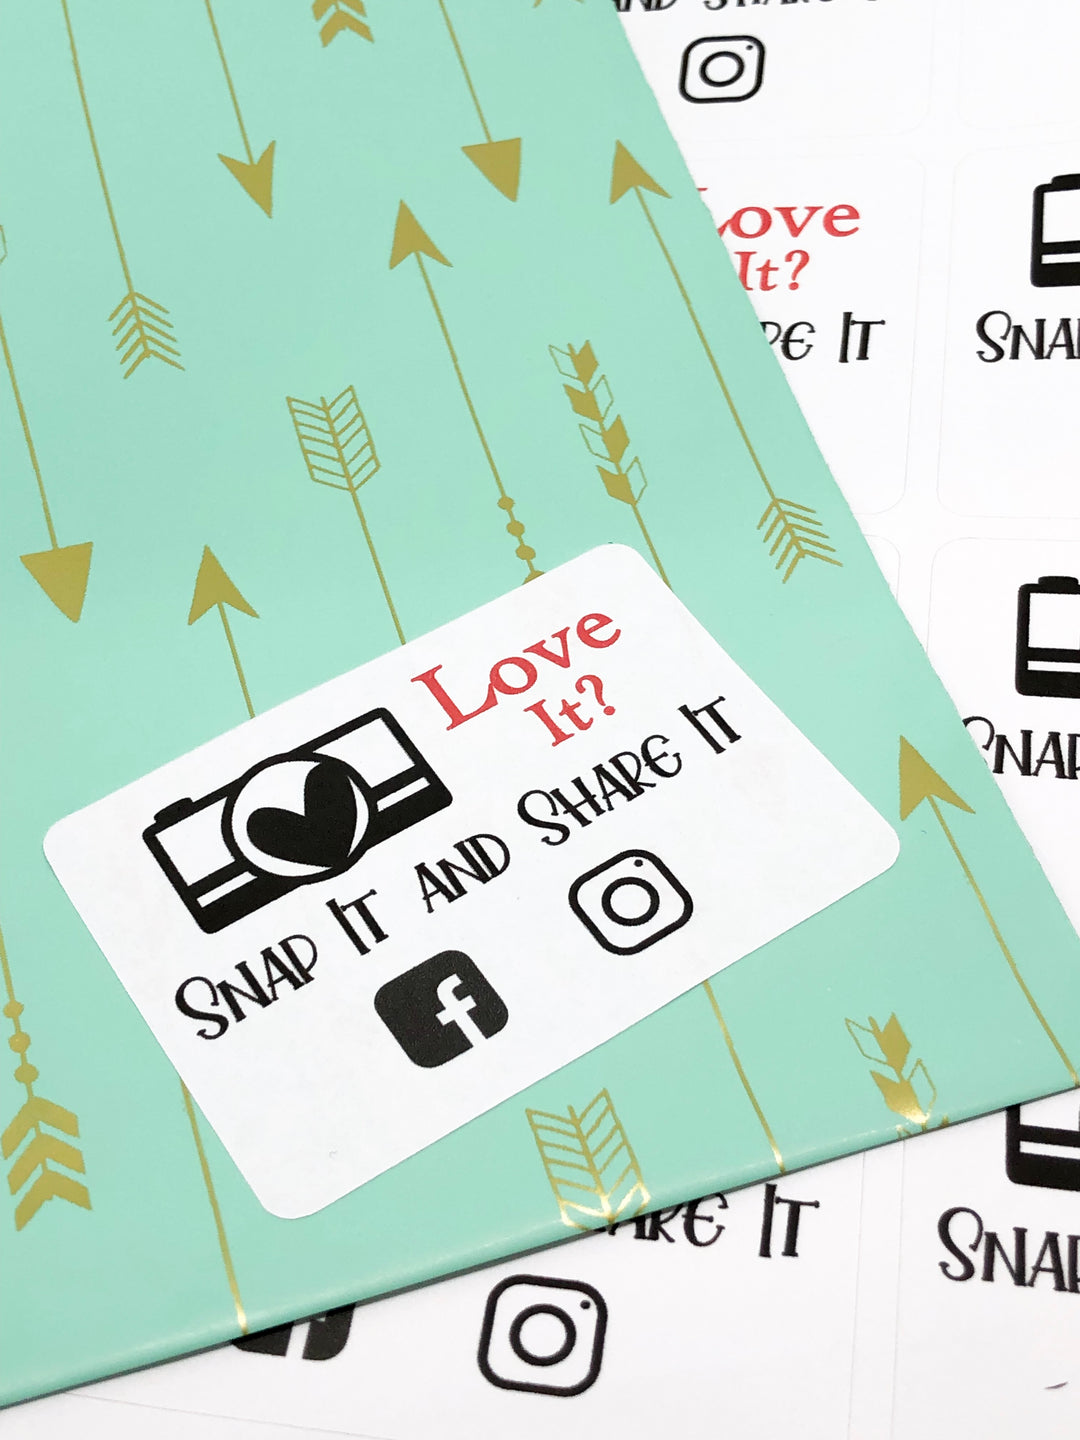 Love It? Snap it and Share It | Packaging Stickers | Business Branding | Small Shop Stickers | Sticker #: S0018 | Ready To Ship